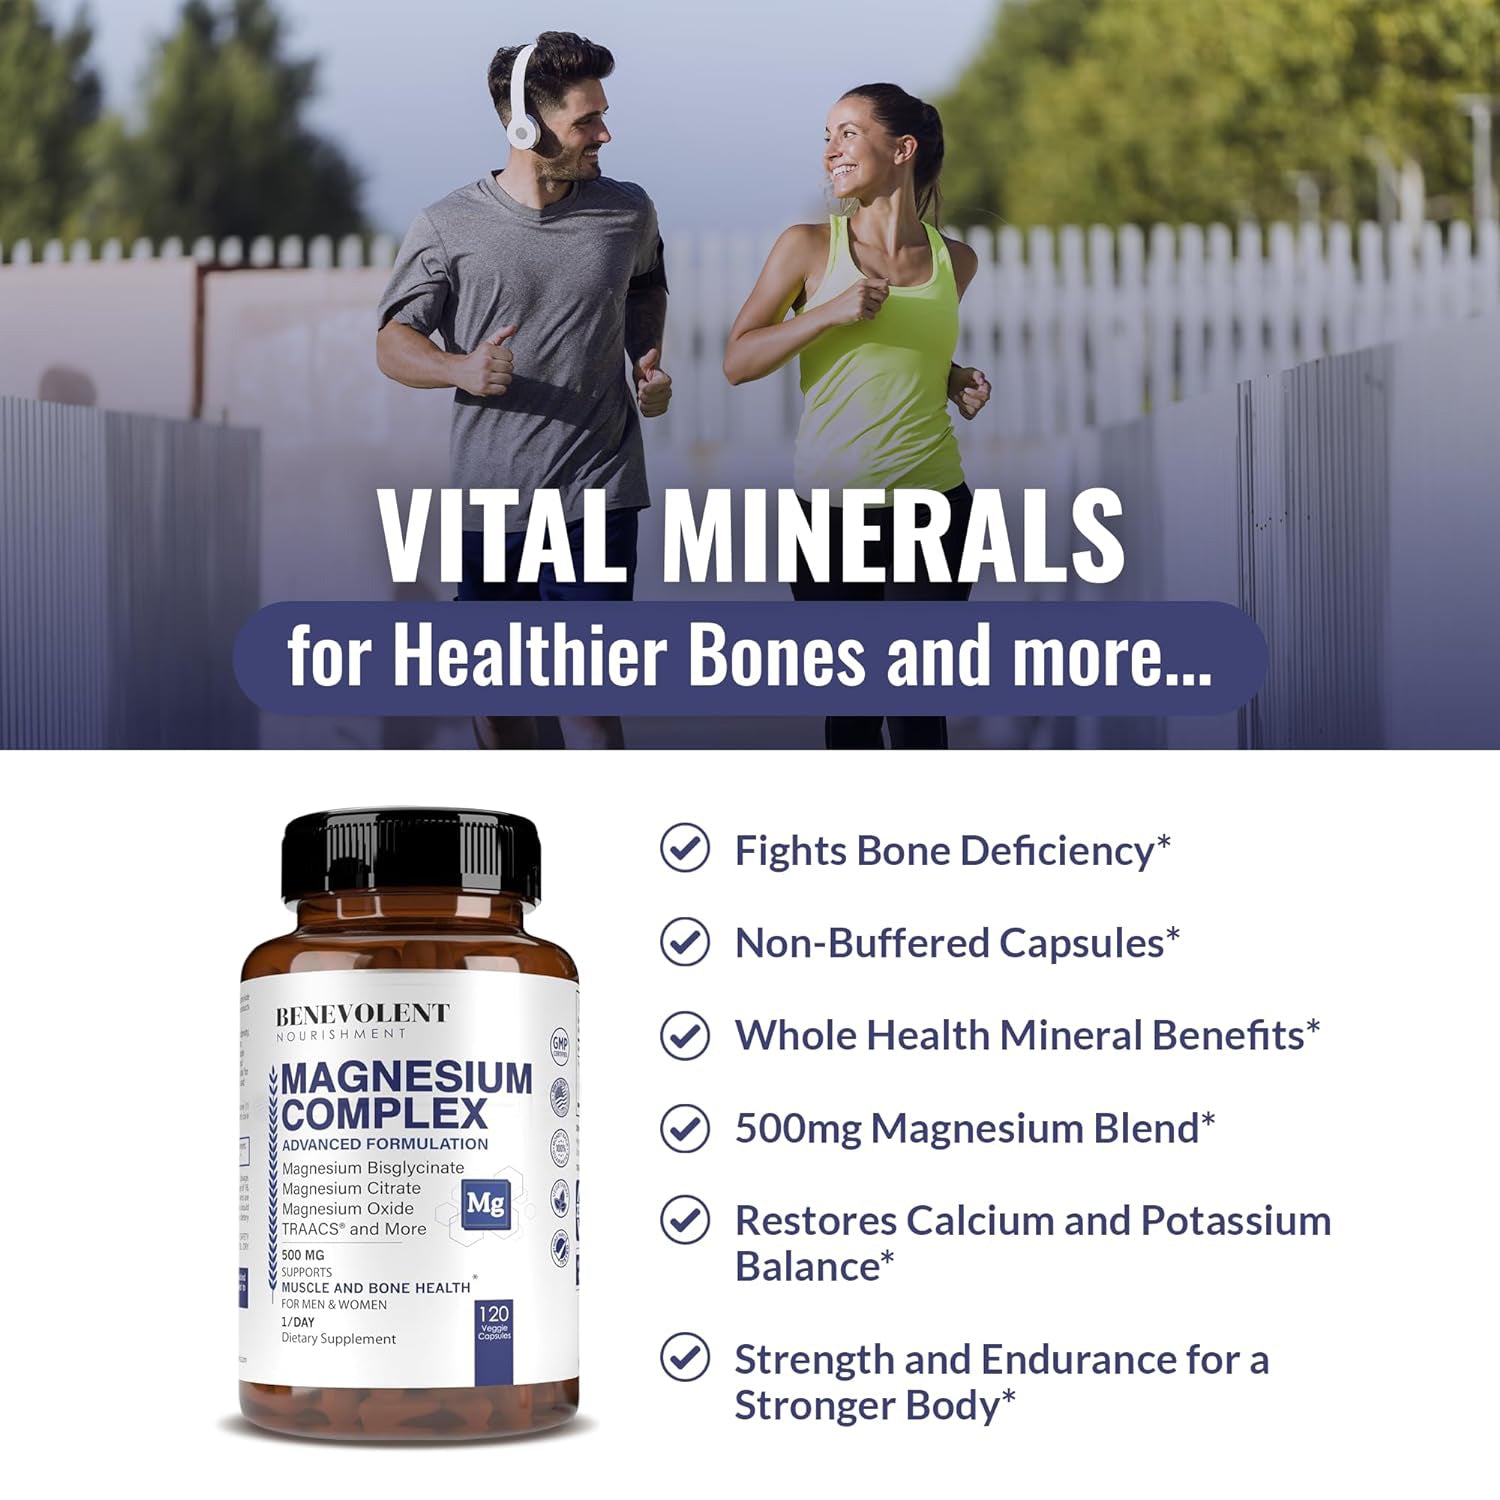 For healthier bones and more